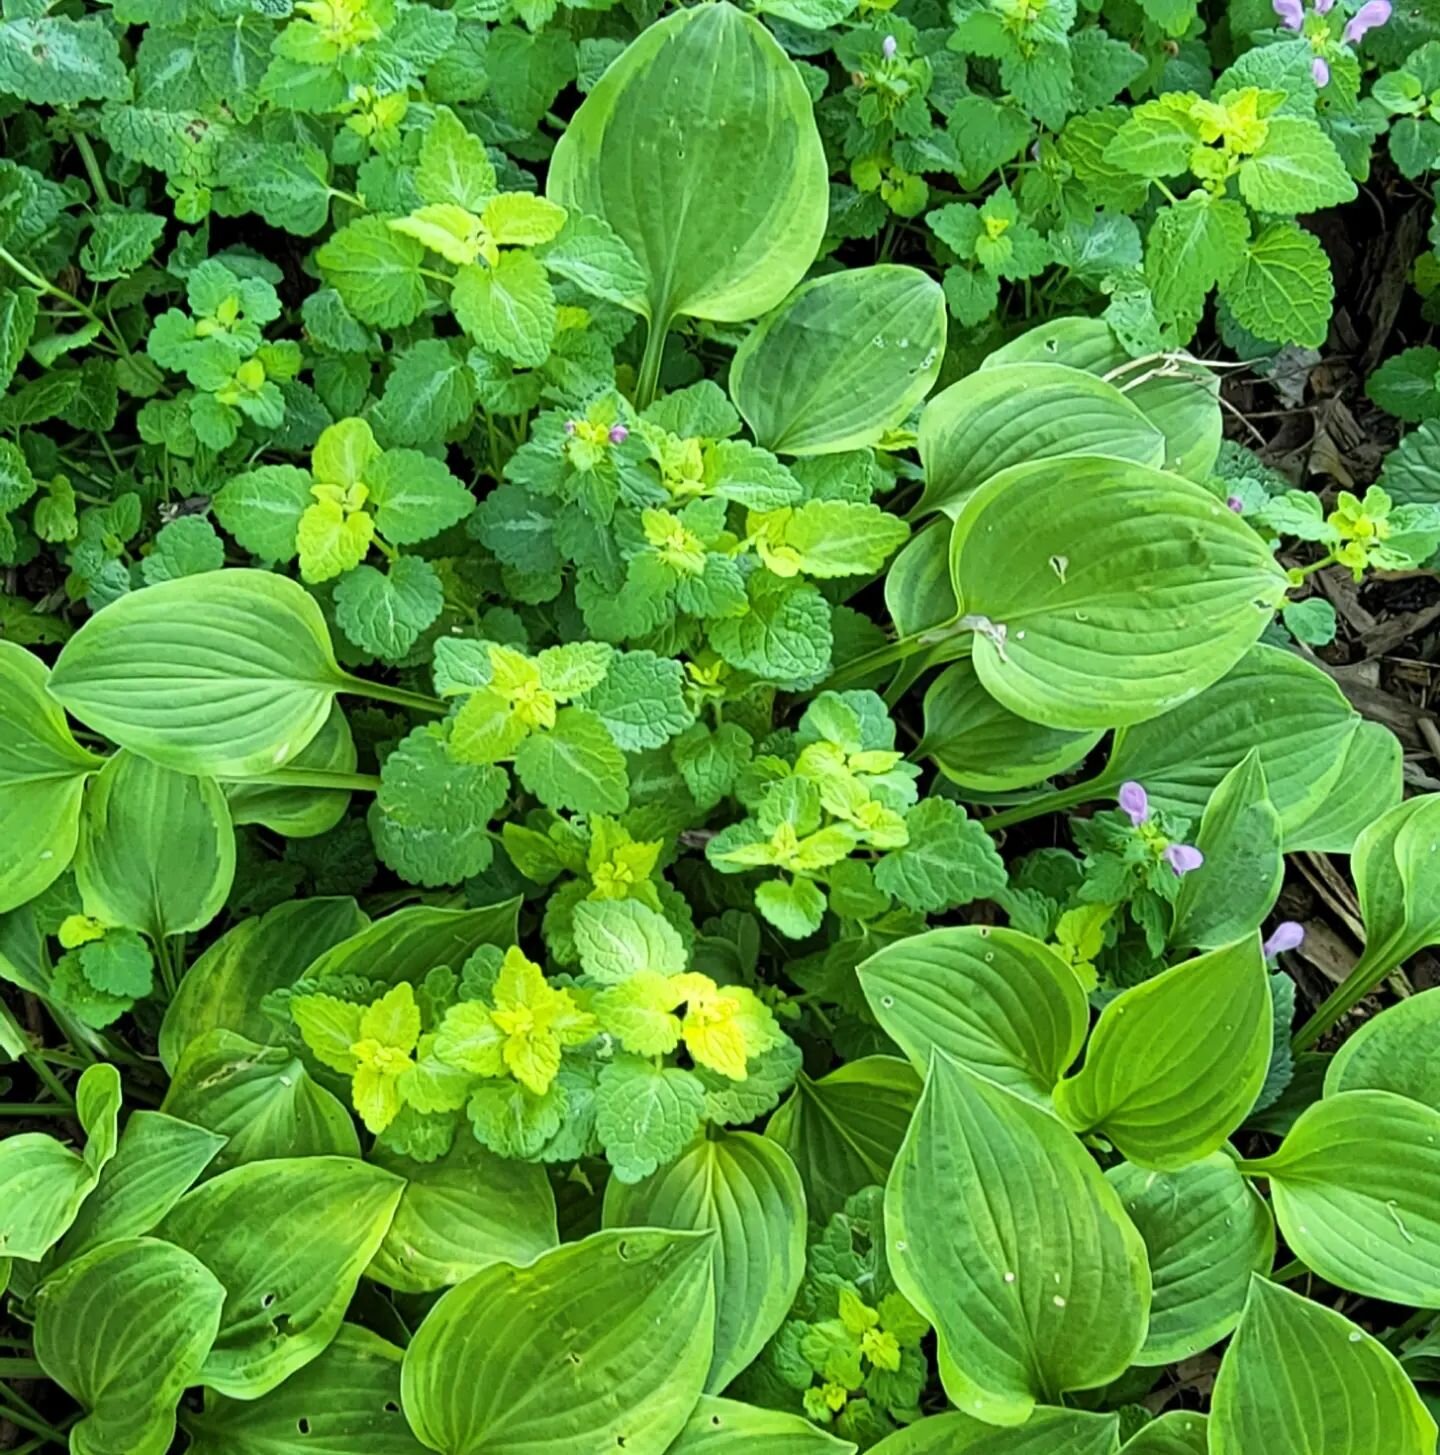 I love this 2 plant combo. 'Golden Tiara' hosta and ground cover 'Aurea' deadnettle (Lamium) work well together, offering texture with contrasting leaf shapes and a yellow hue to brighten up the shade garden. They're both easy to grow and will fill i